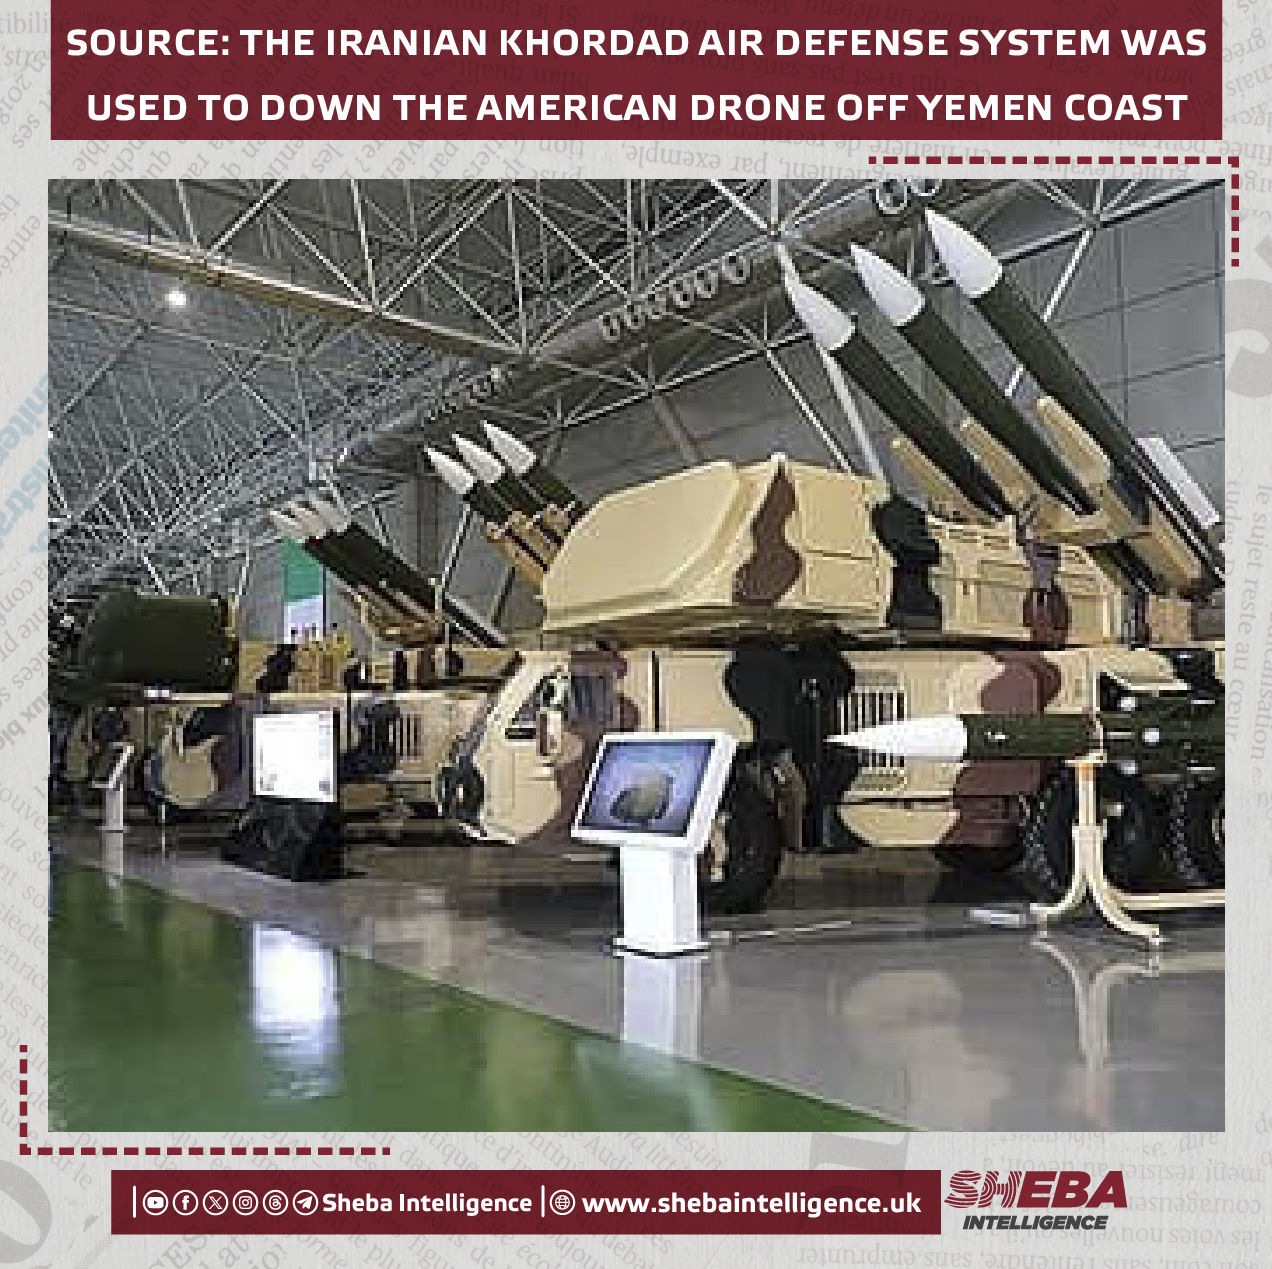 Source: The Iranian Khordad Air Defense System Was Used to Down the American Drone Off Yemen Coast